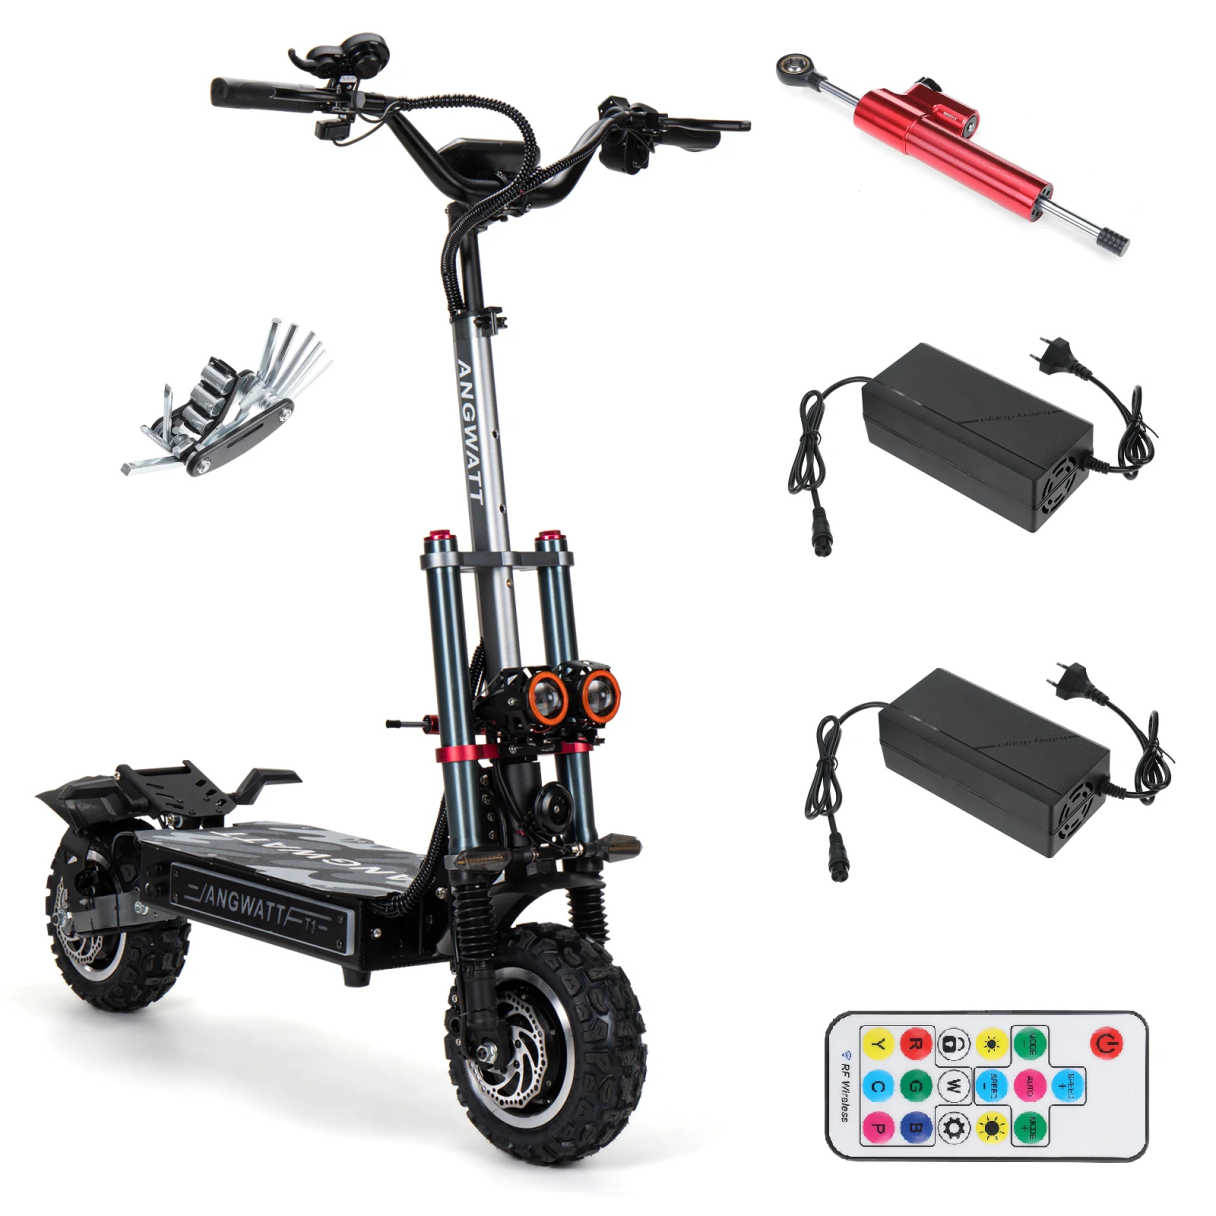 [EU DIRECT] ANGWATT T1 Electric Scooter 60V 35Ah 6000W (2*3000W) Dual Motor 11inch Off-Road Electric Scooter Steering Damper Electric Scooter 80-105km Mileage 200kg Max Load EU Plug